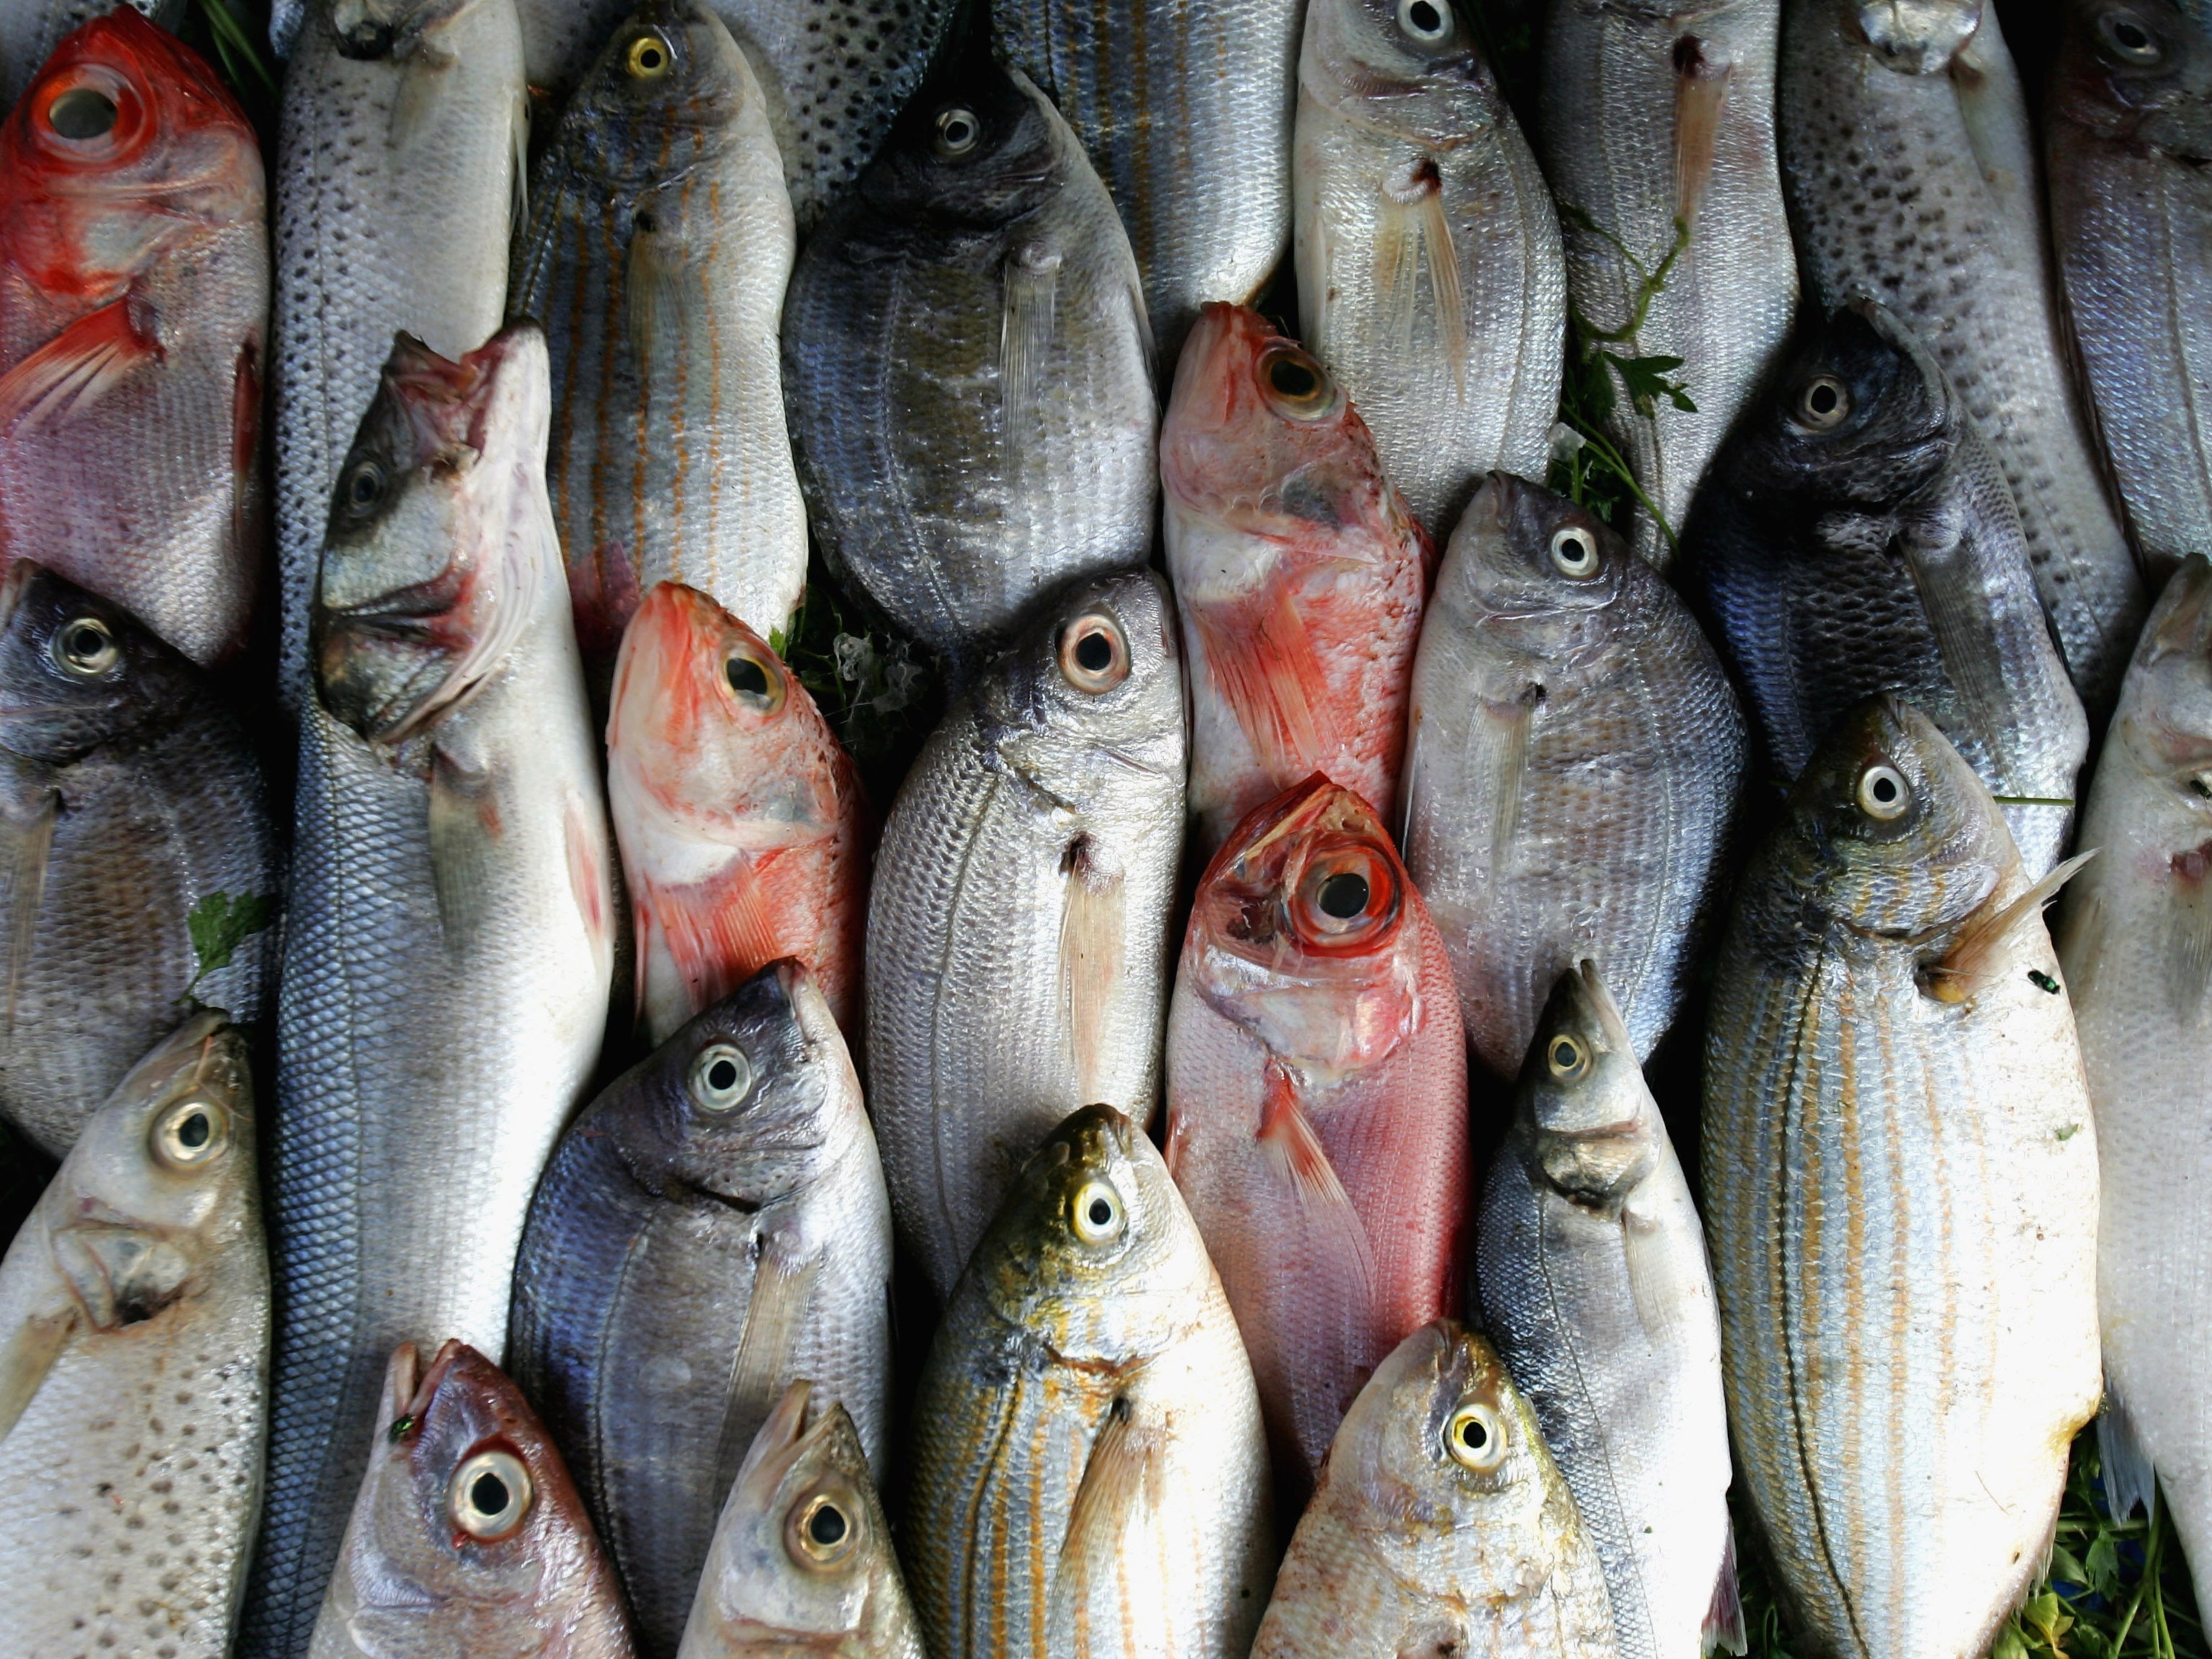 Study points to link between skin cancer and eating too much fish